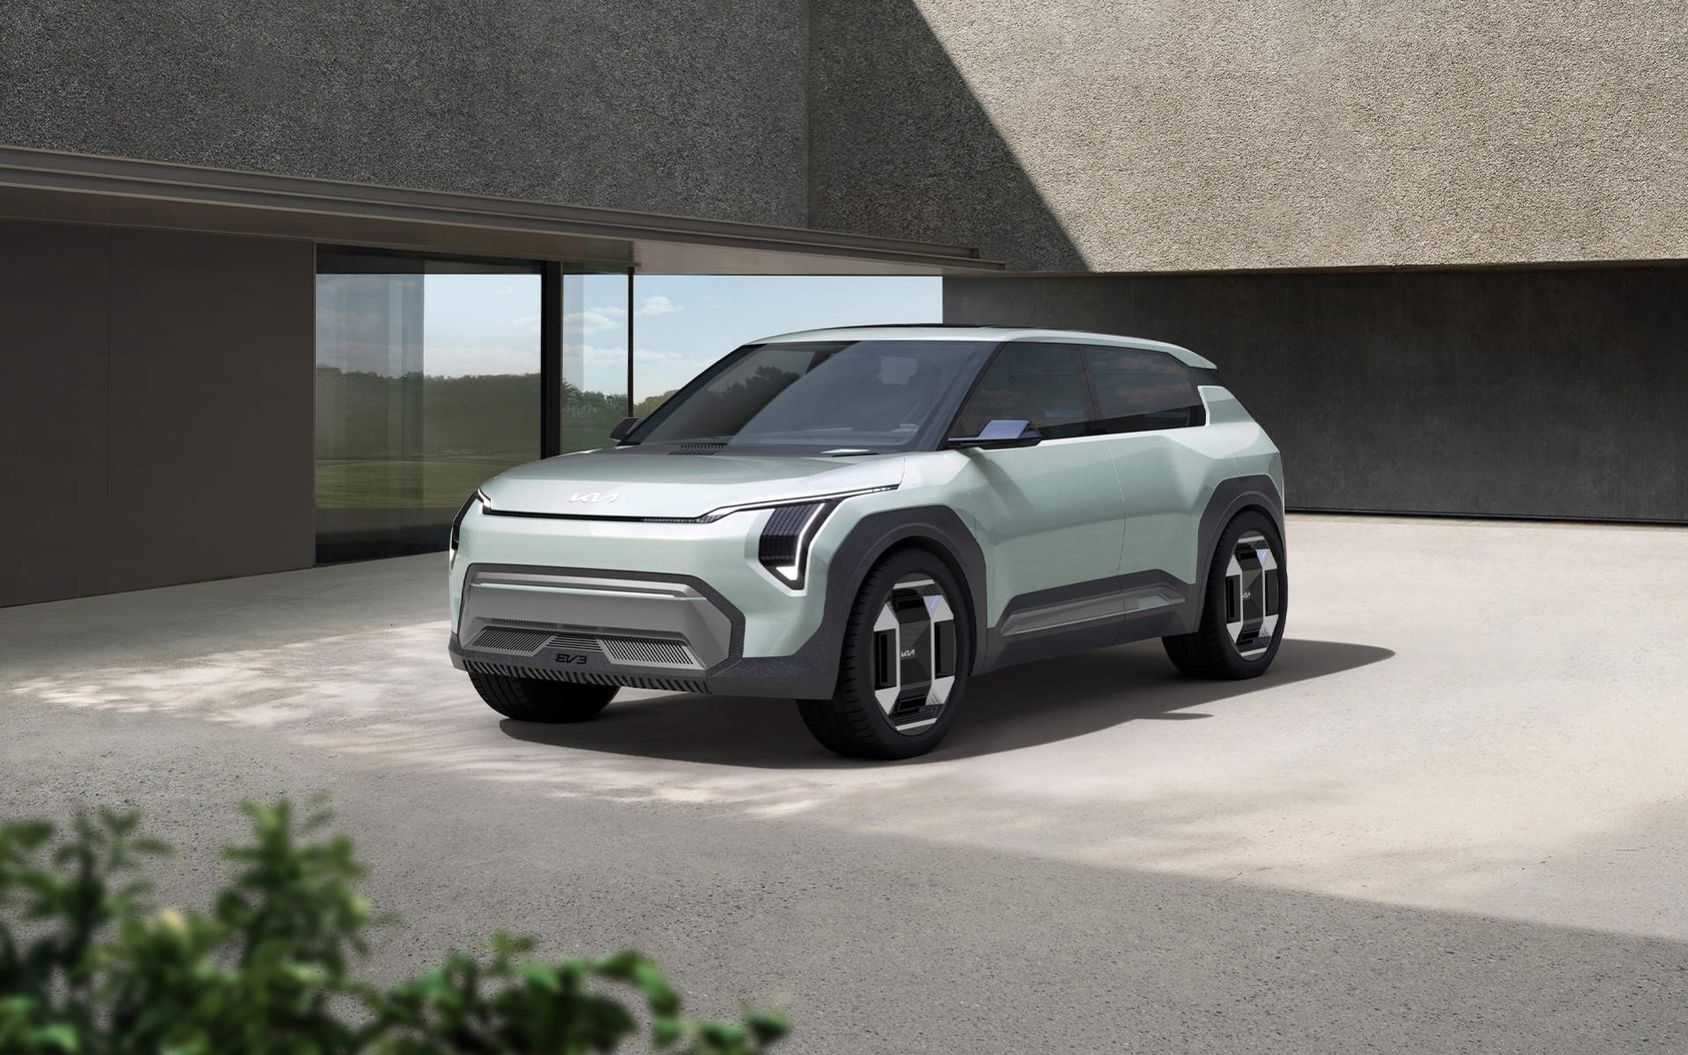 Kia will launch the EV3 this year